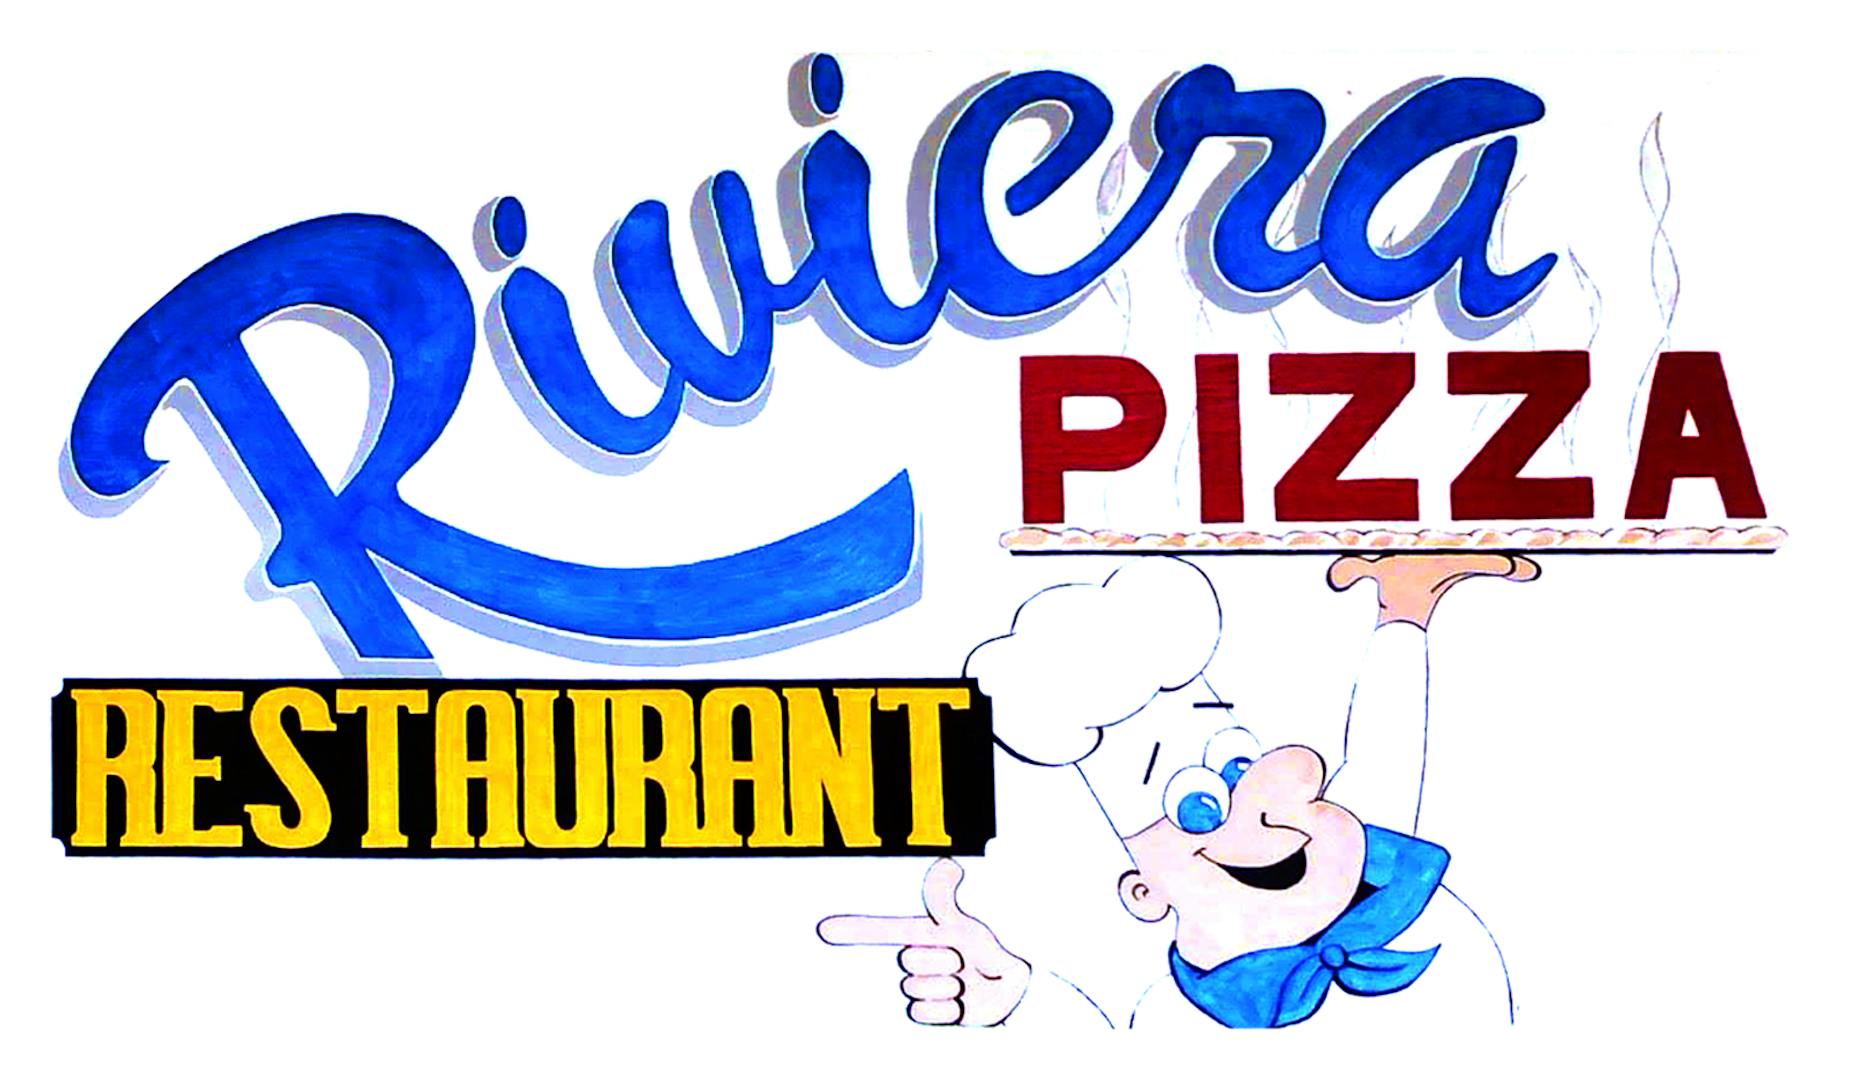 Welcome to Riviera Pizza!